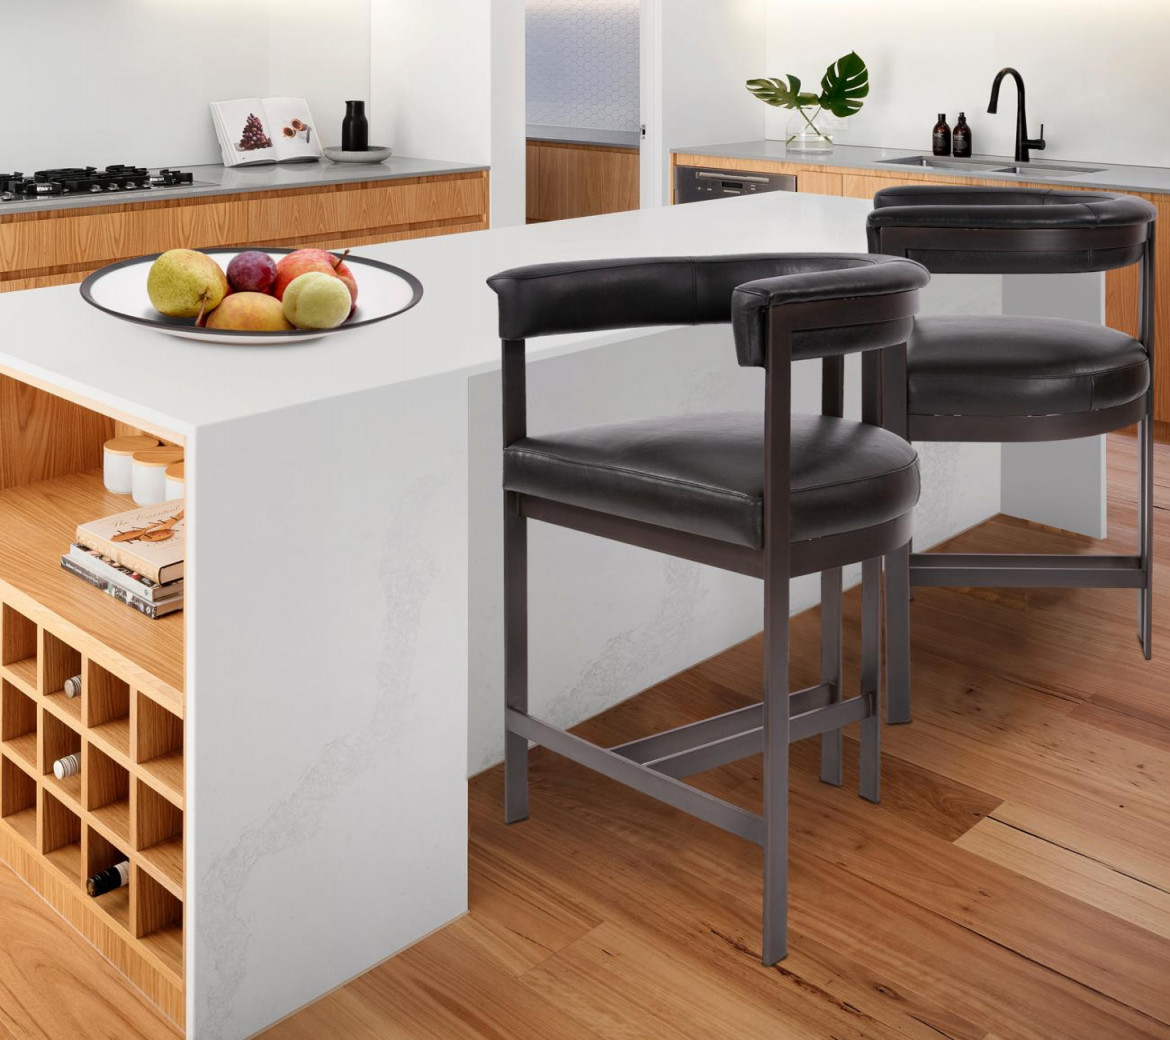 Support Stools: Bar Stools for Counters and High Top Tables